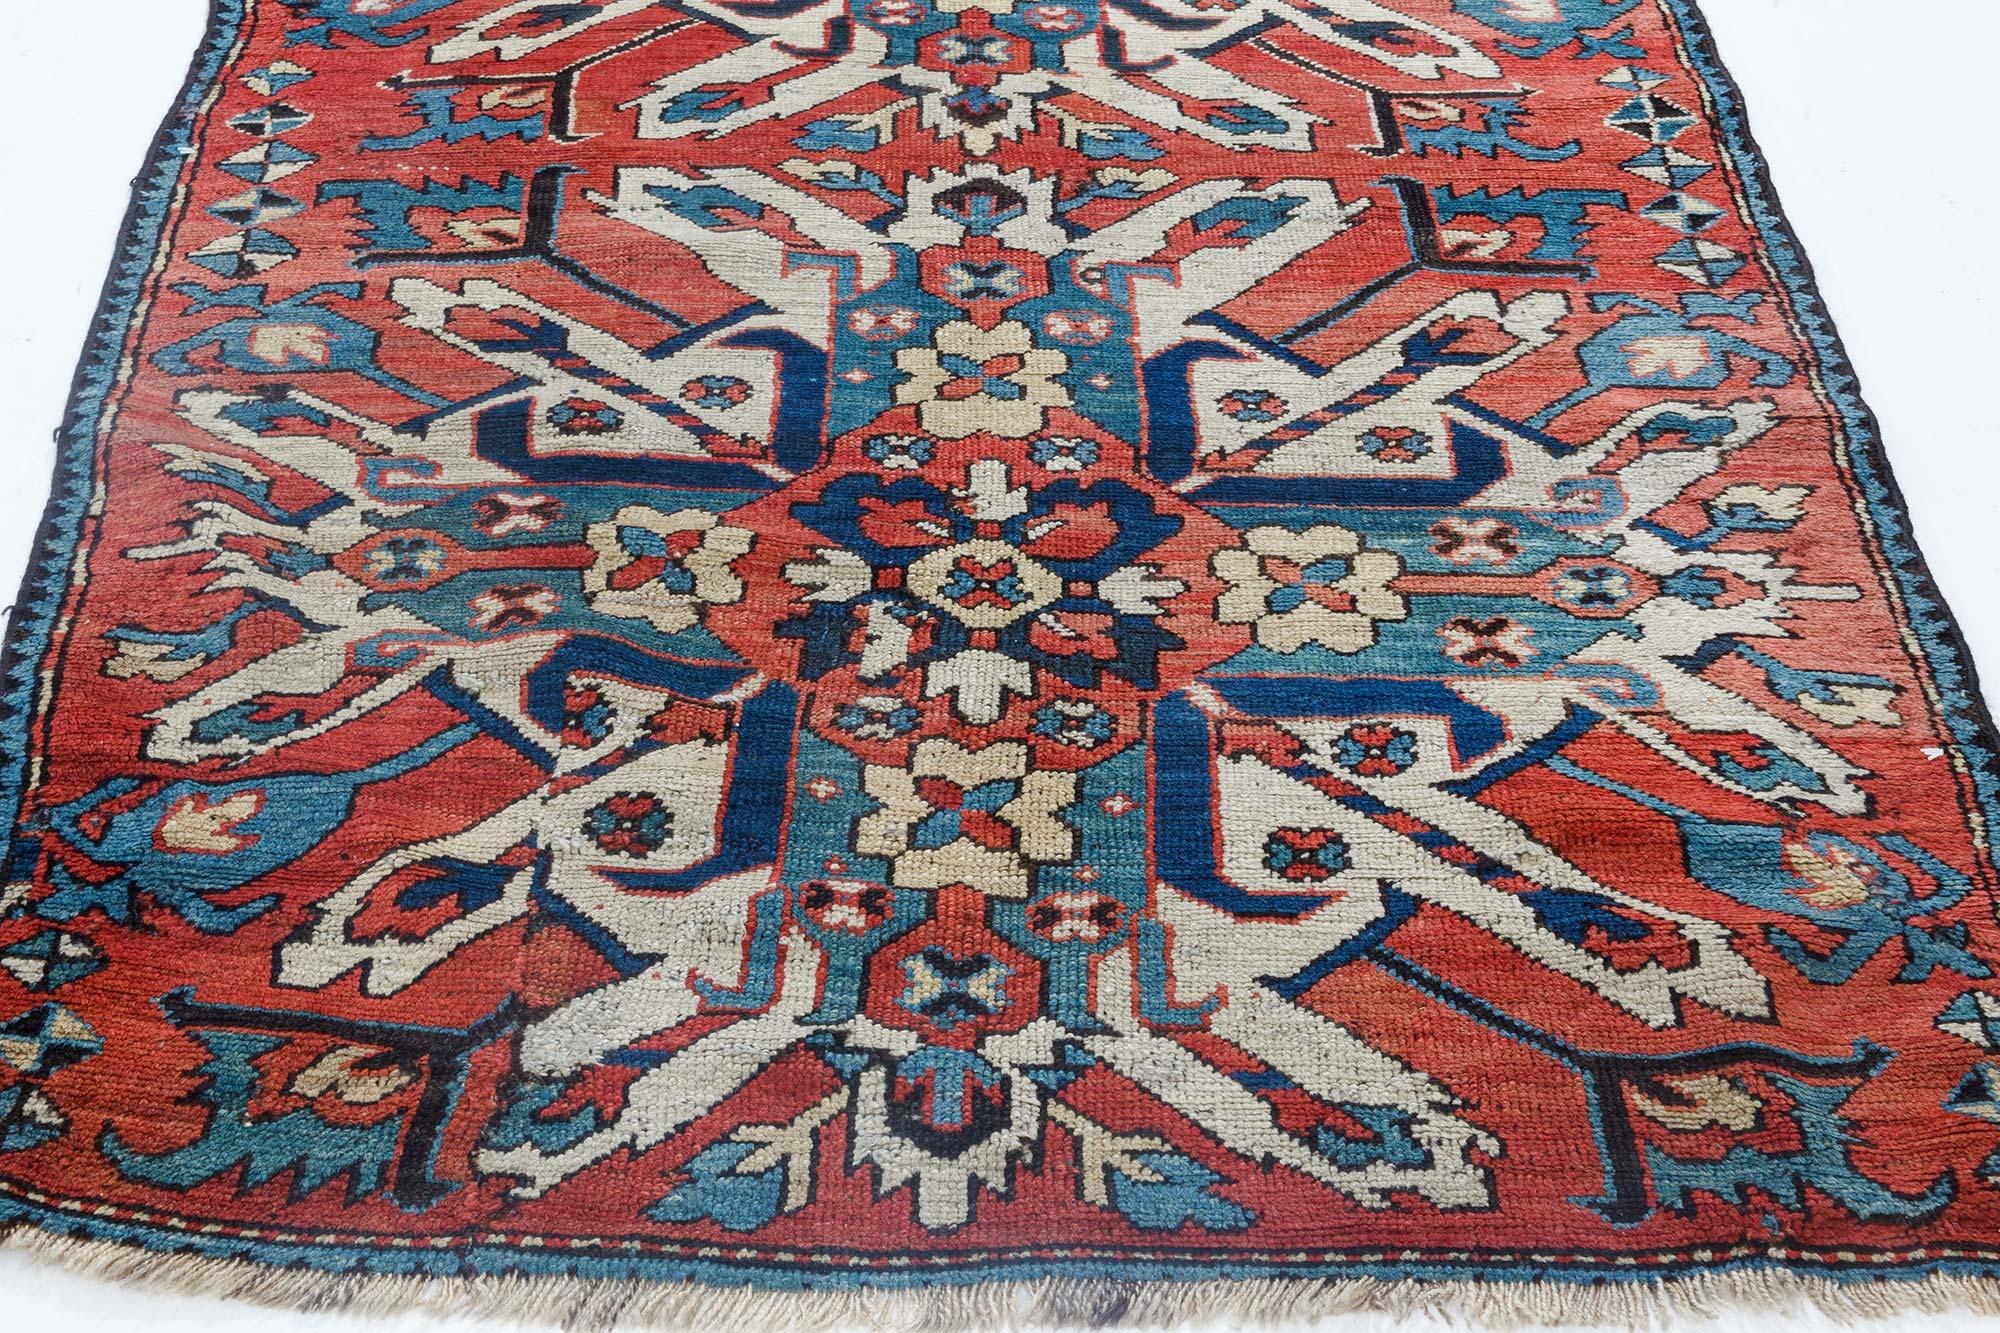 Hand-Knotted 1920s Kazak Blue, Red and White Handmade Wool Rug